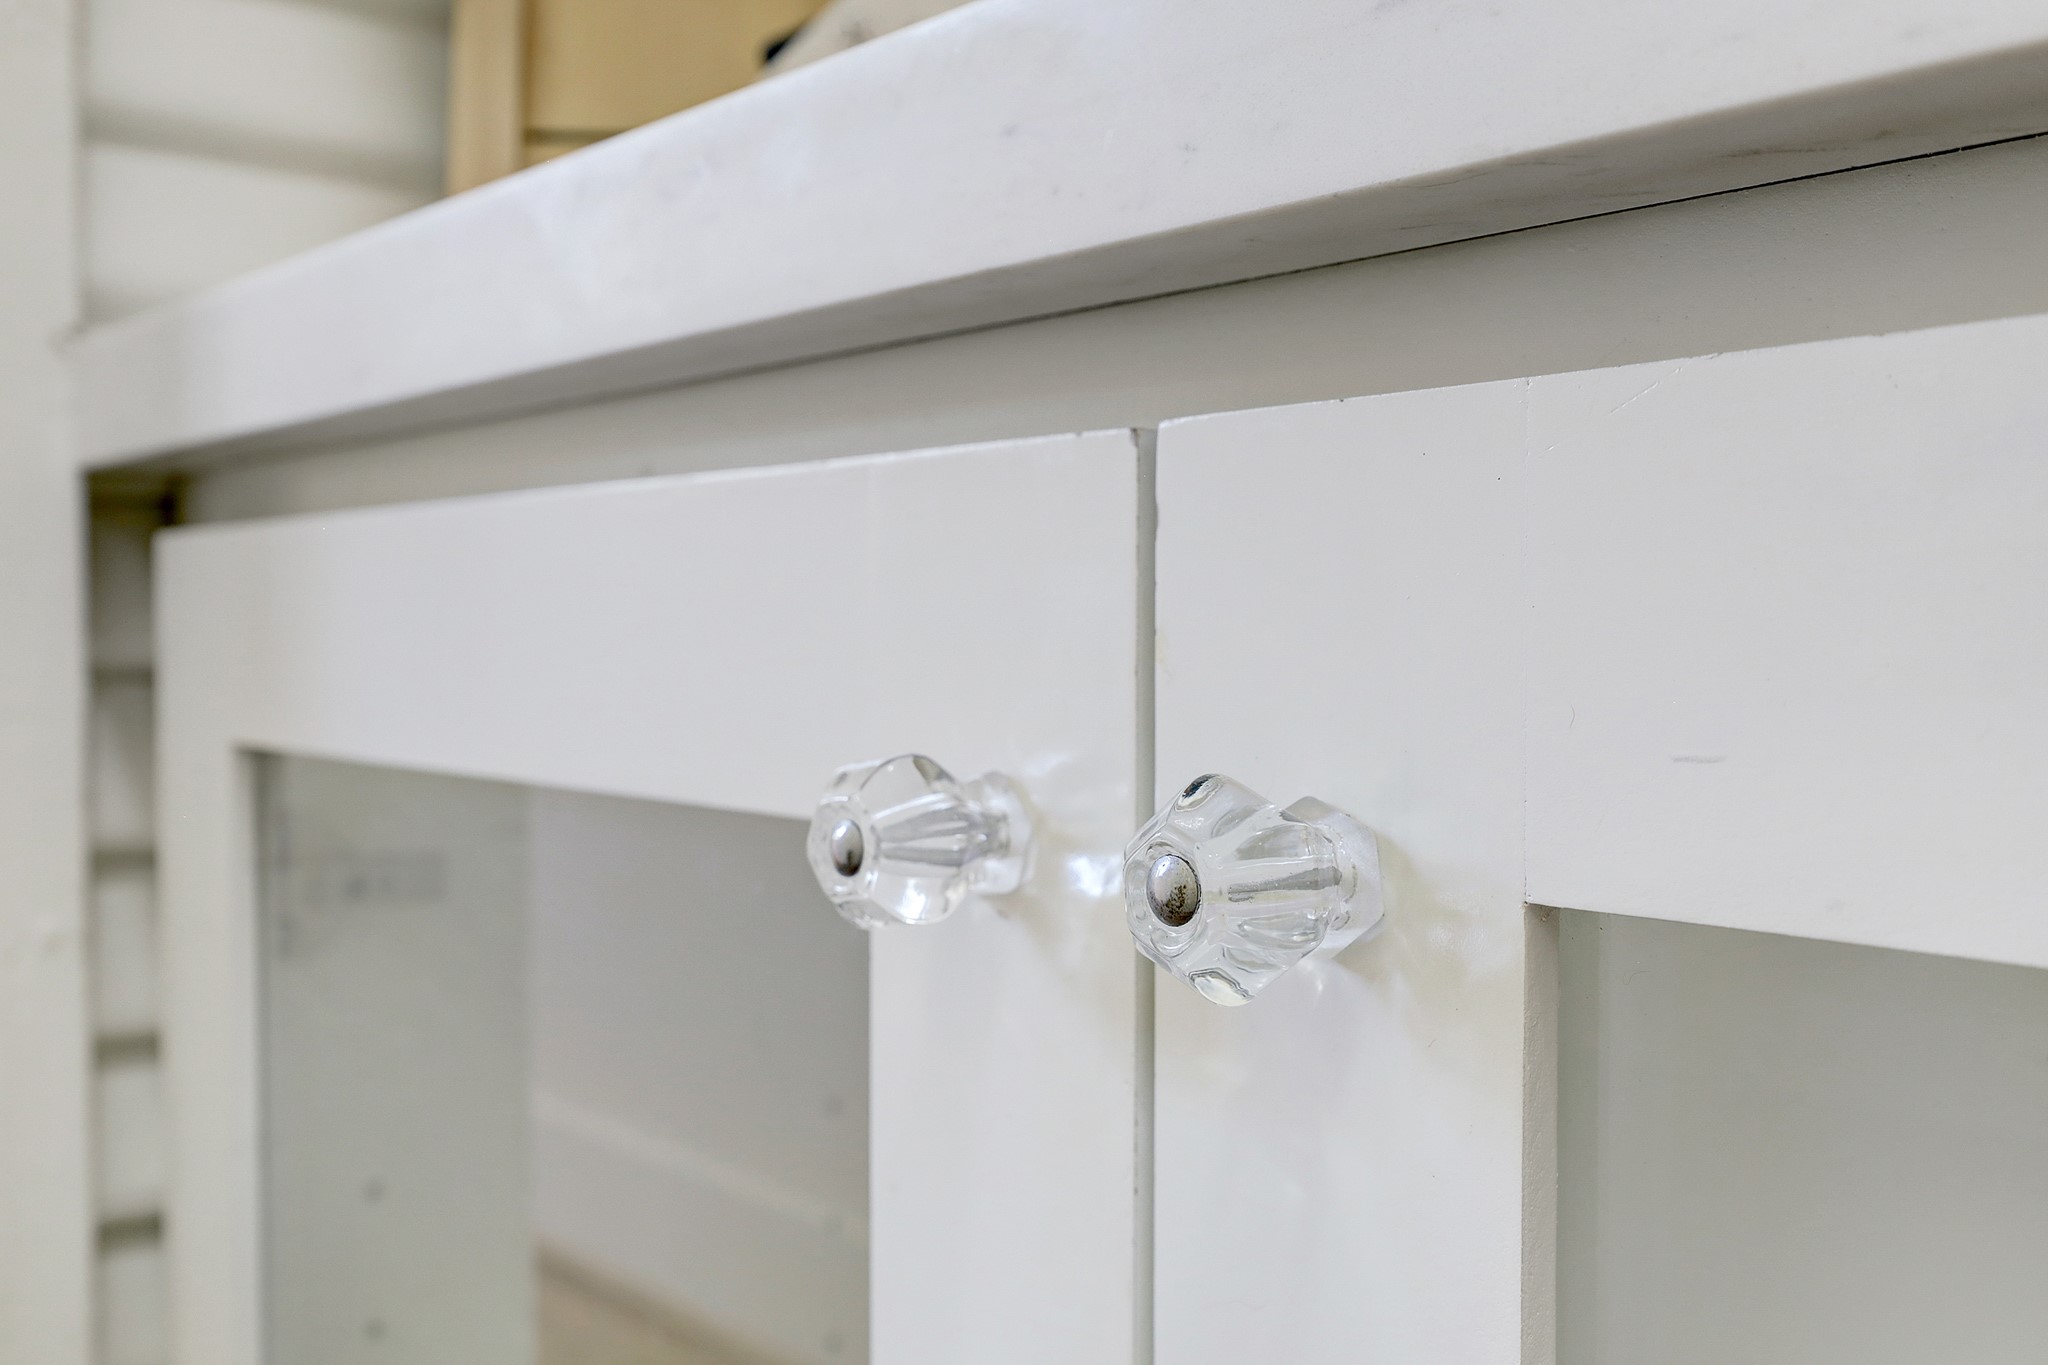 Drawer pulls and finishings selected to match period.